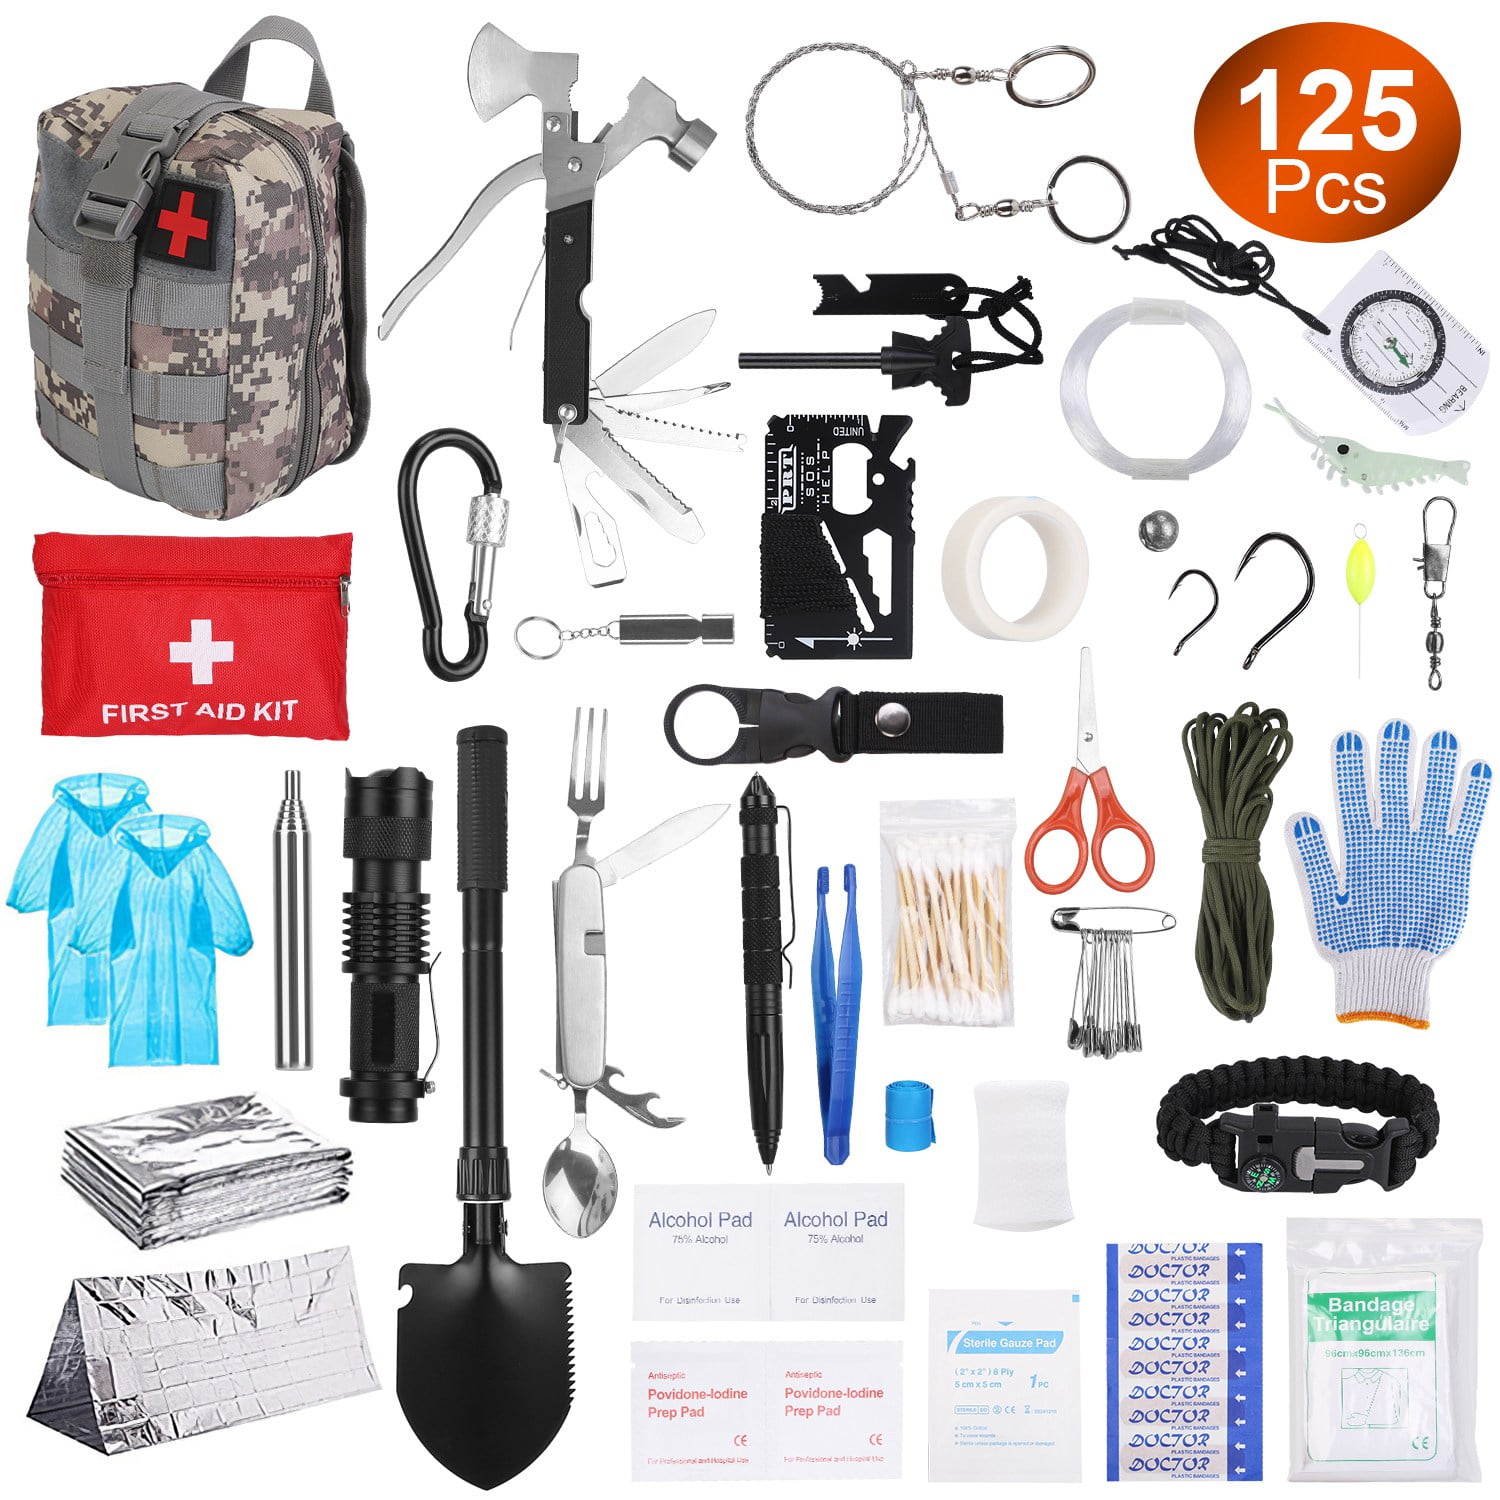 YIDERBO First Aid Kit Survival Kit, 274Pcs Upgraded Outdoor Emergency  Survival Kit Gear - Medical Supplies Trauma Bag Safety First Aid Kit for  Home